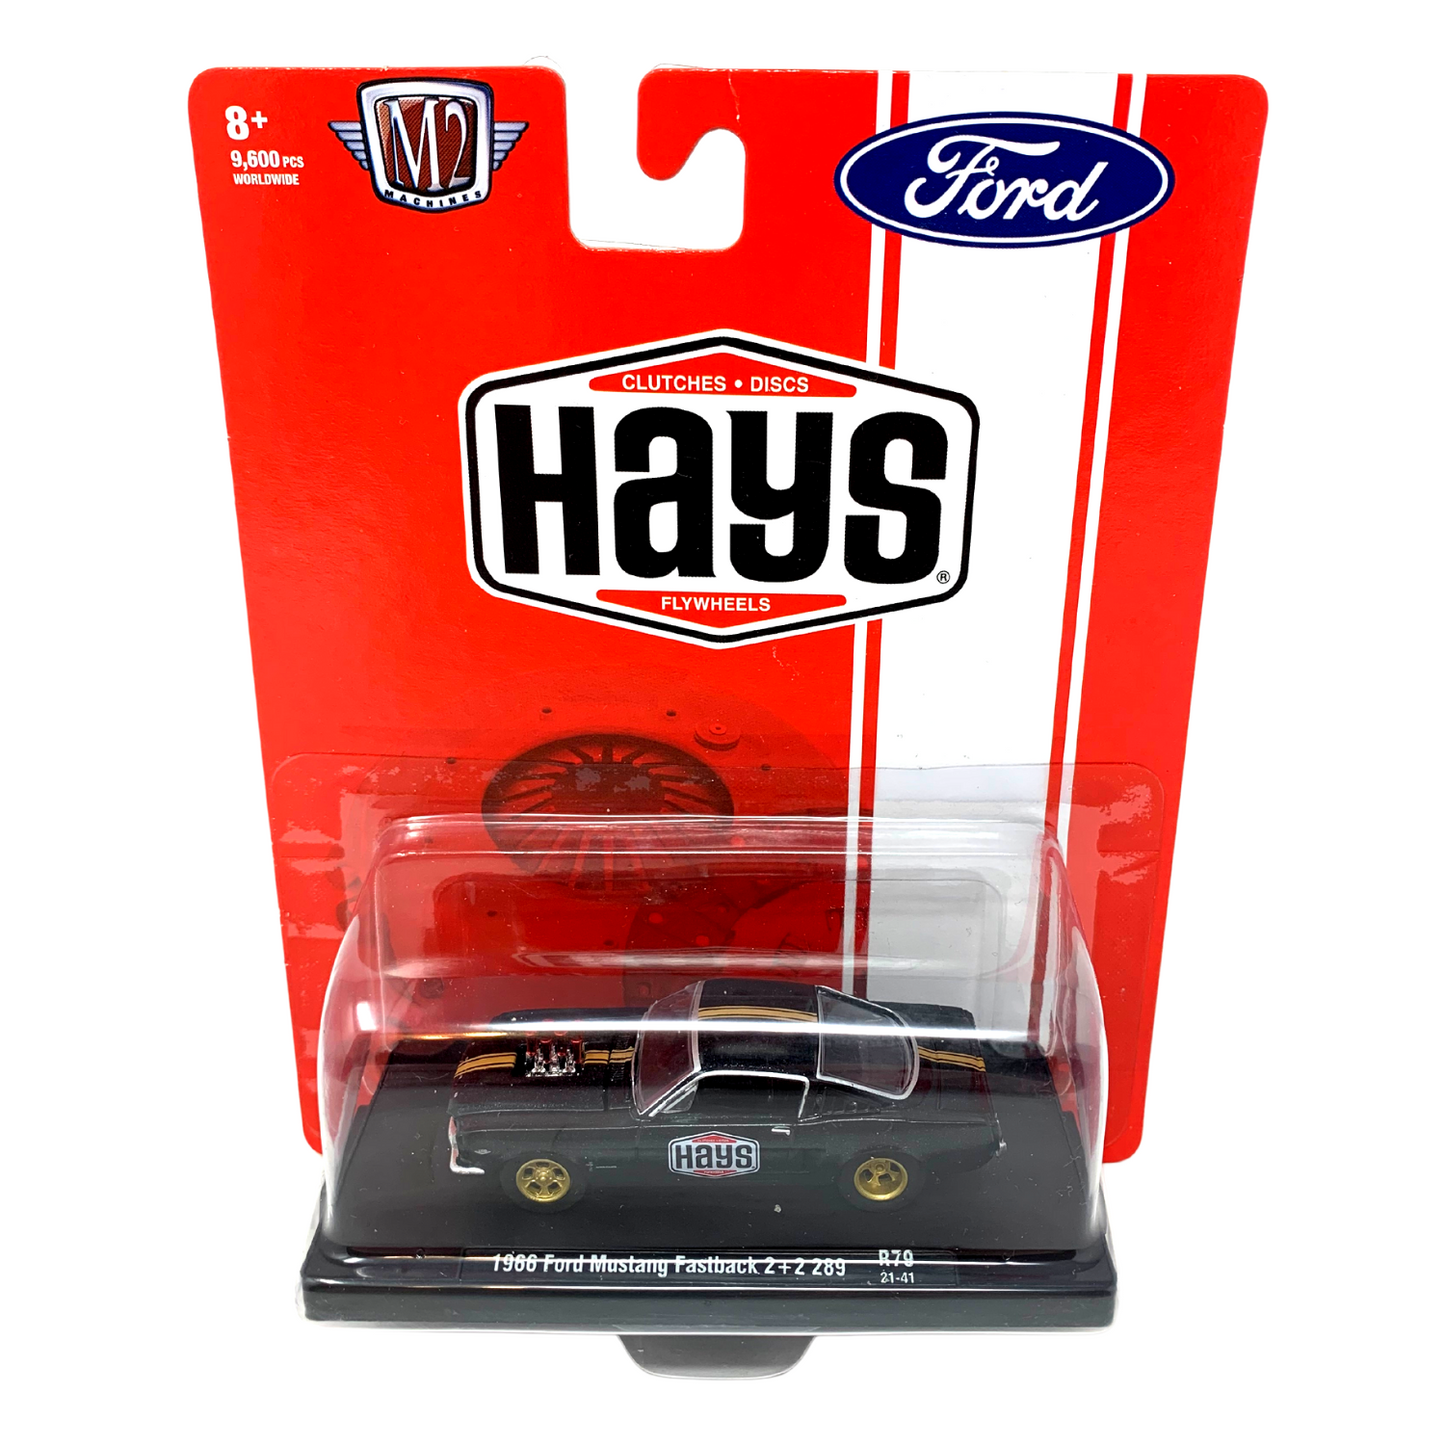 M2 Machines Hays 1966 Ford Mustang Fastback 2+2 289 R79 1:64 Diecast